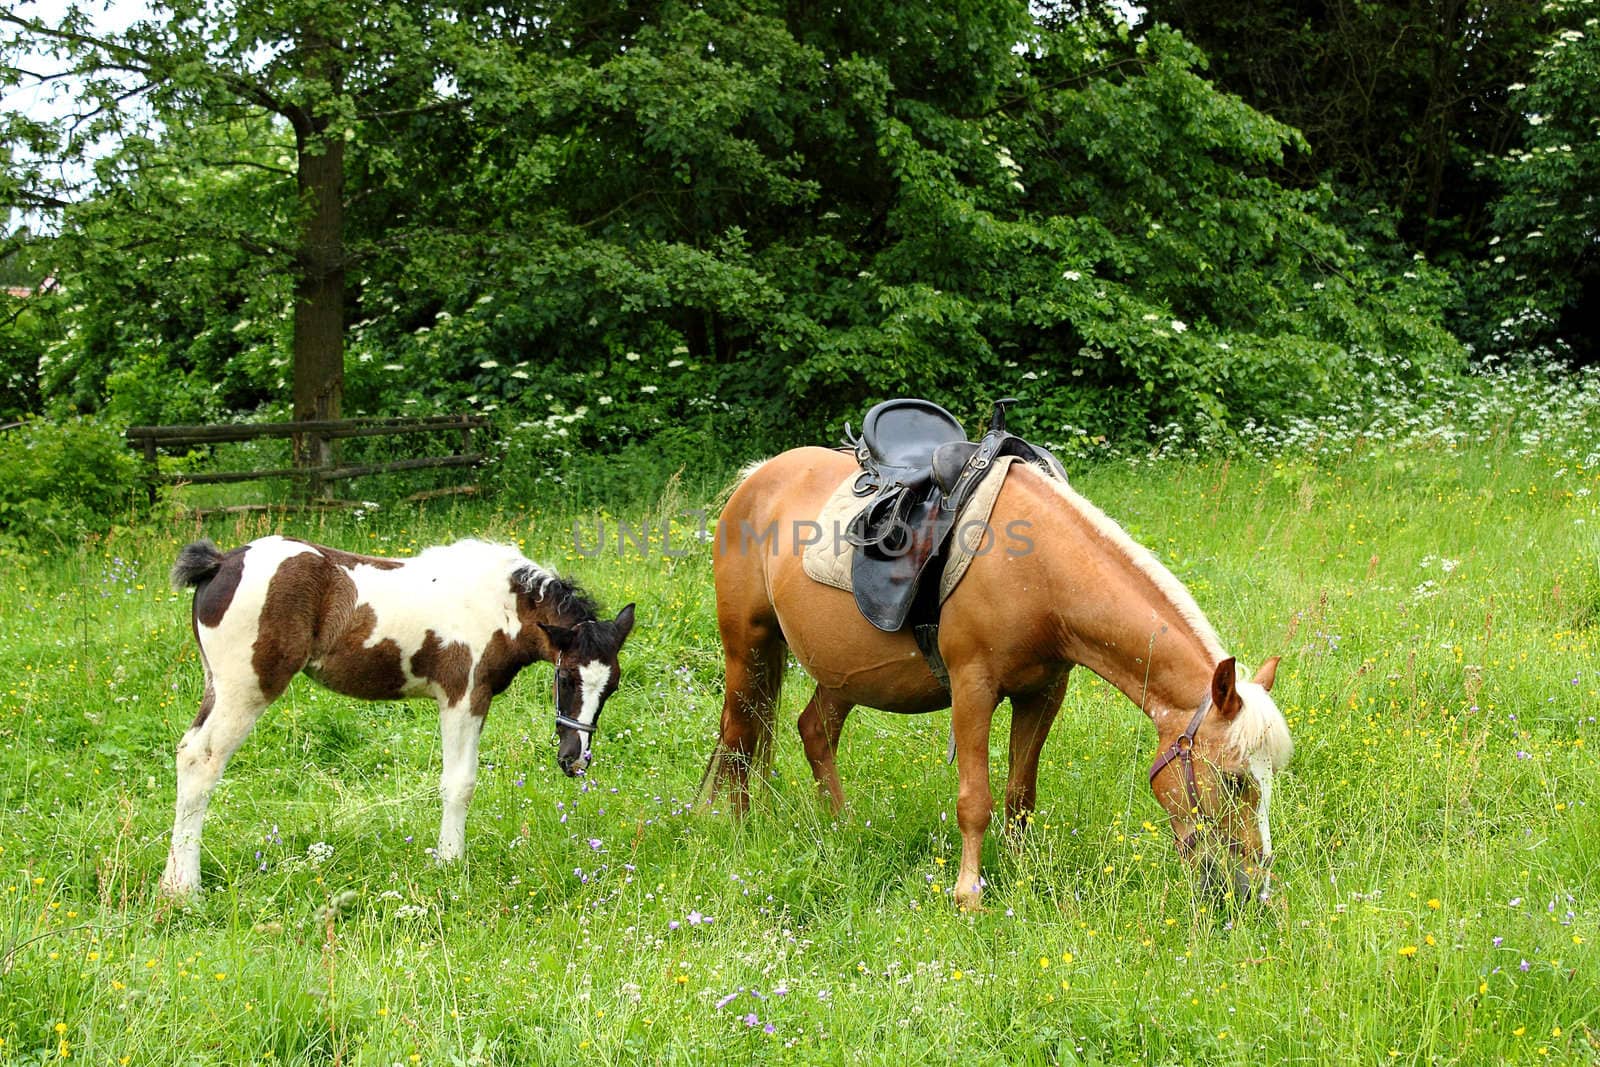 grazing mare and her foal on grass field